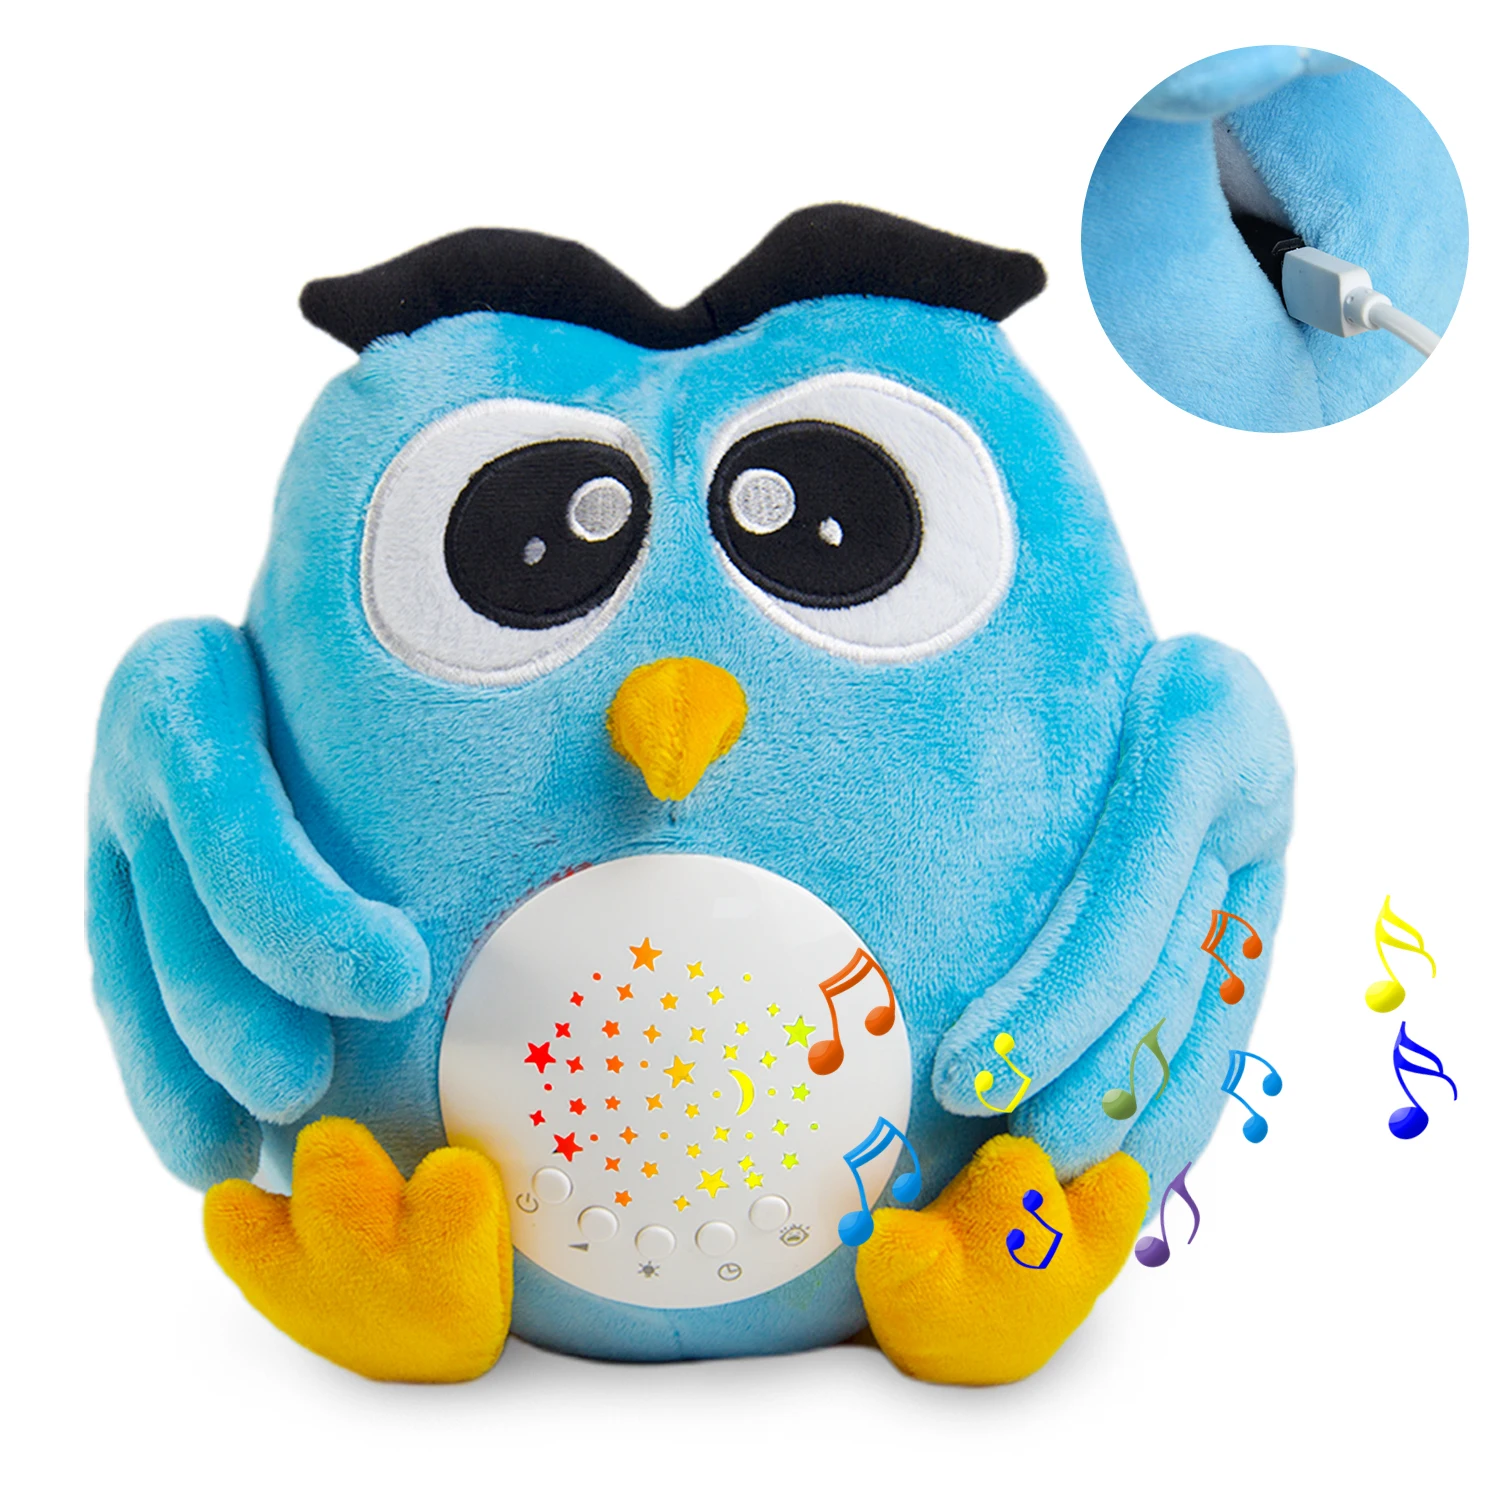 Baby sleeping therapy machine owl plush toys soothing withe noise sound machine with star night light projector